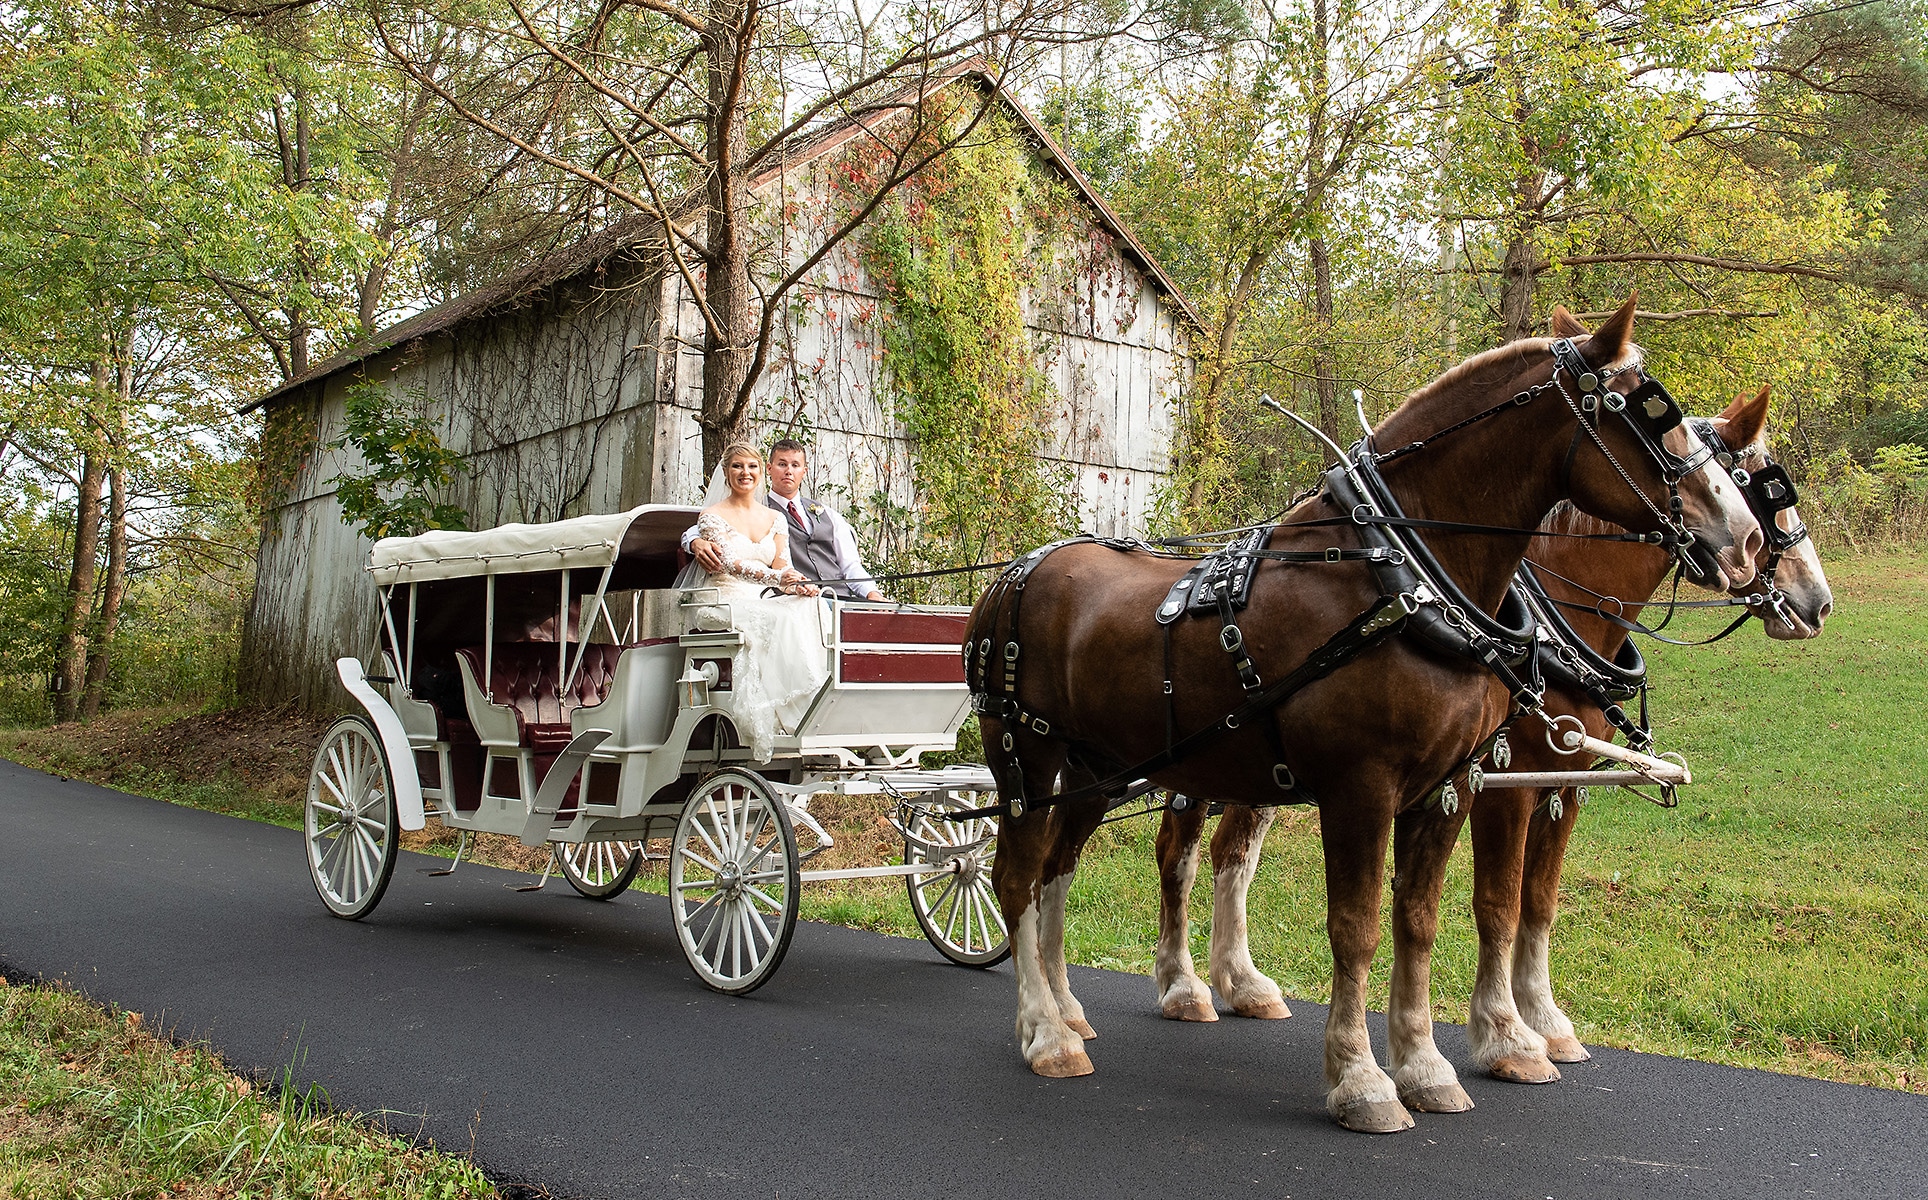 Valley View Farm Venue - Horse and Wagon